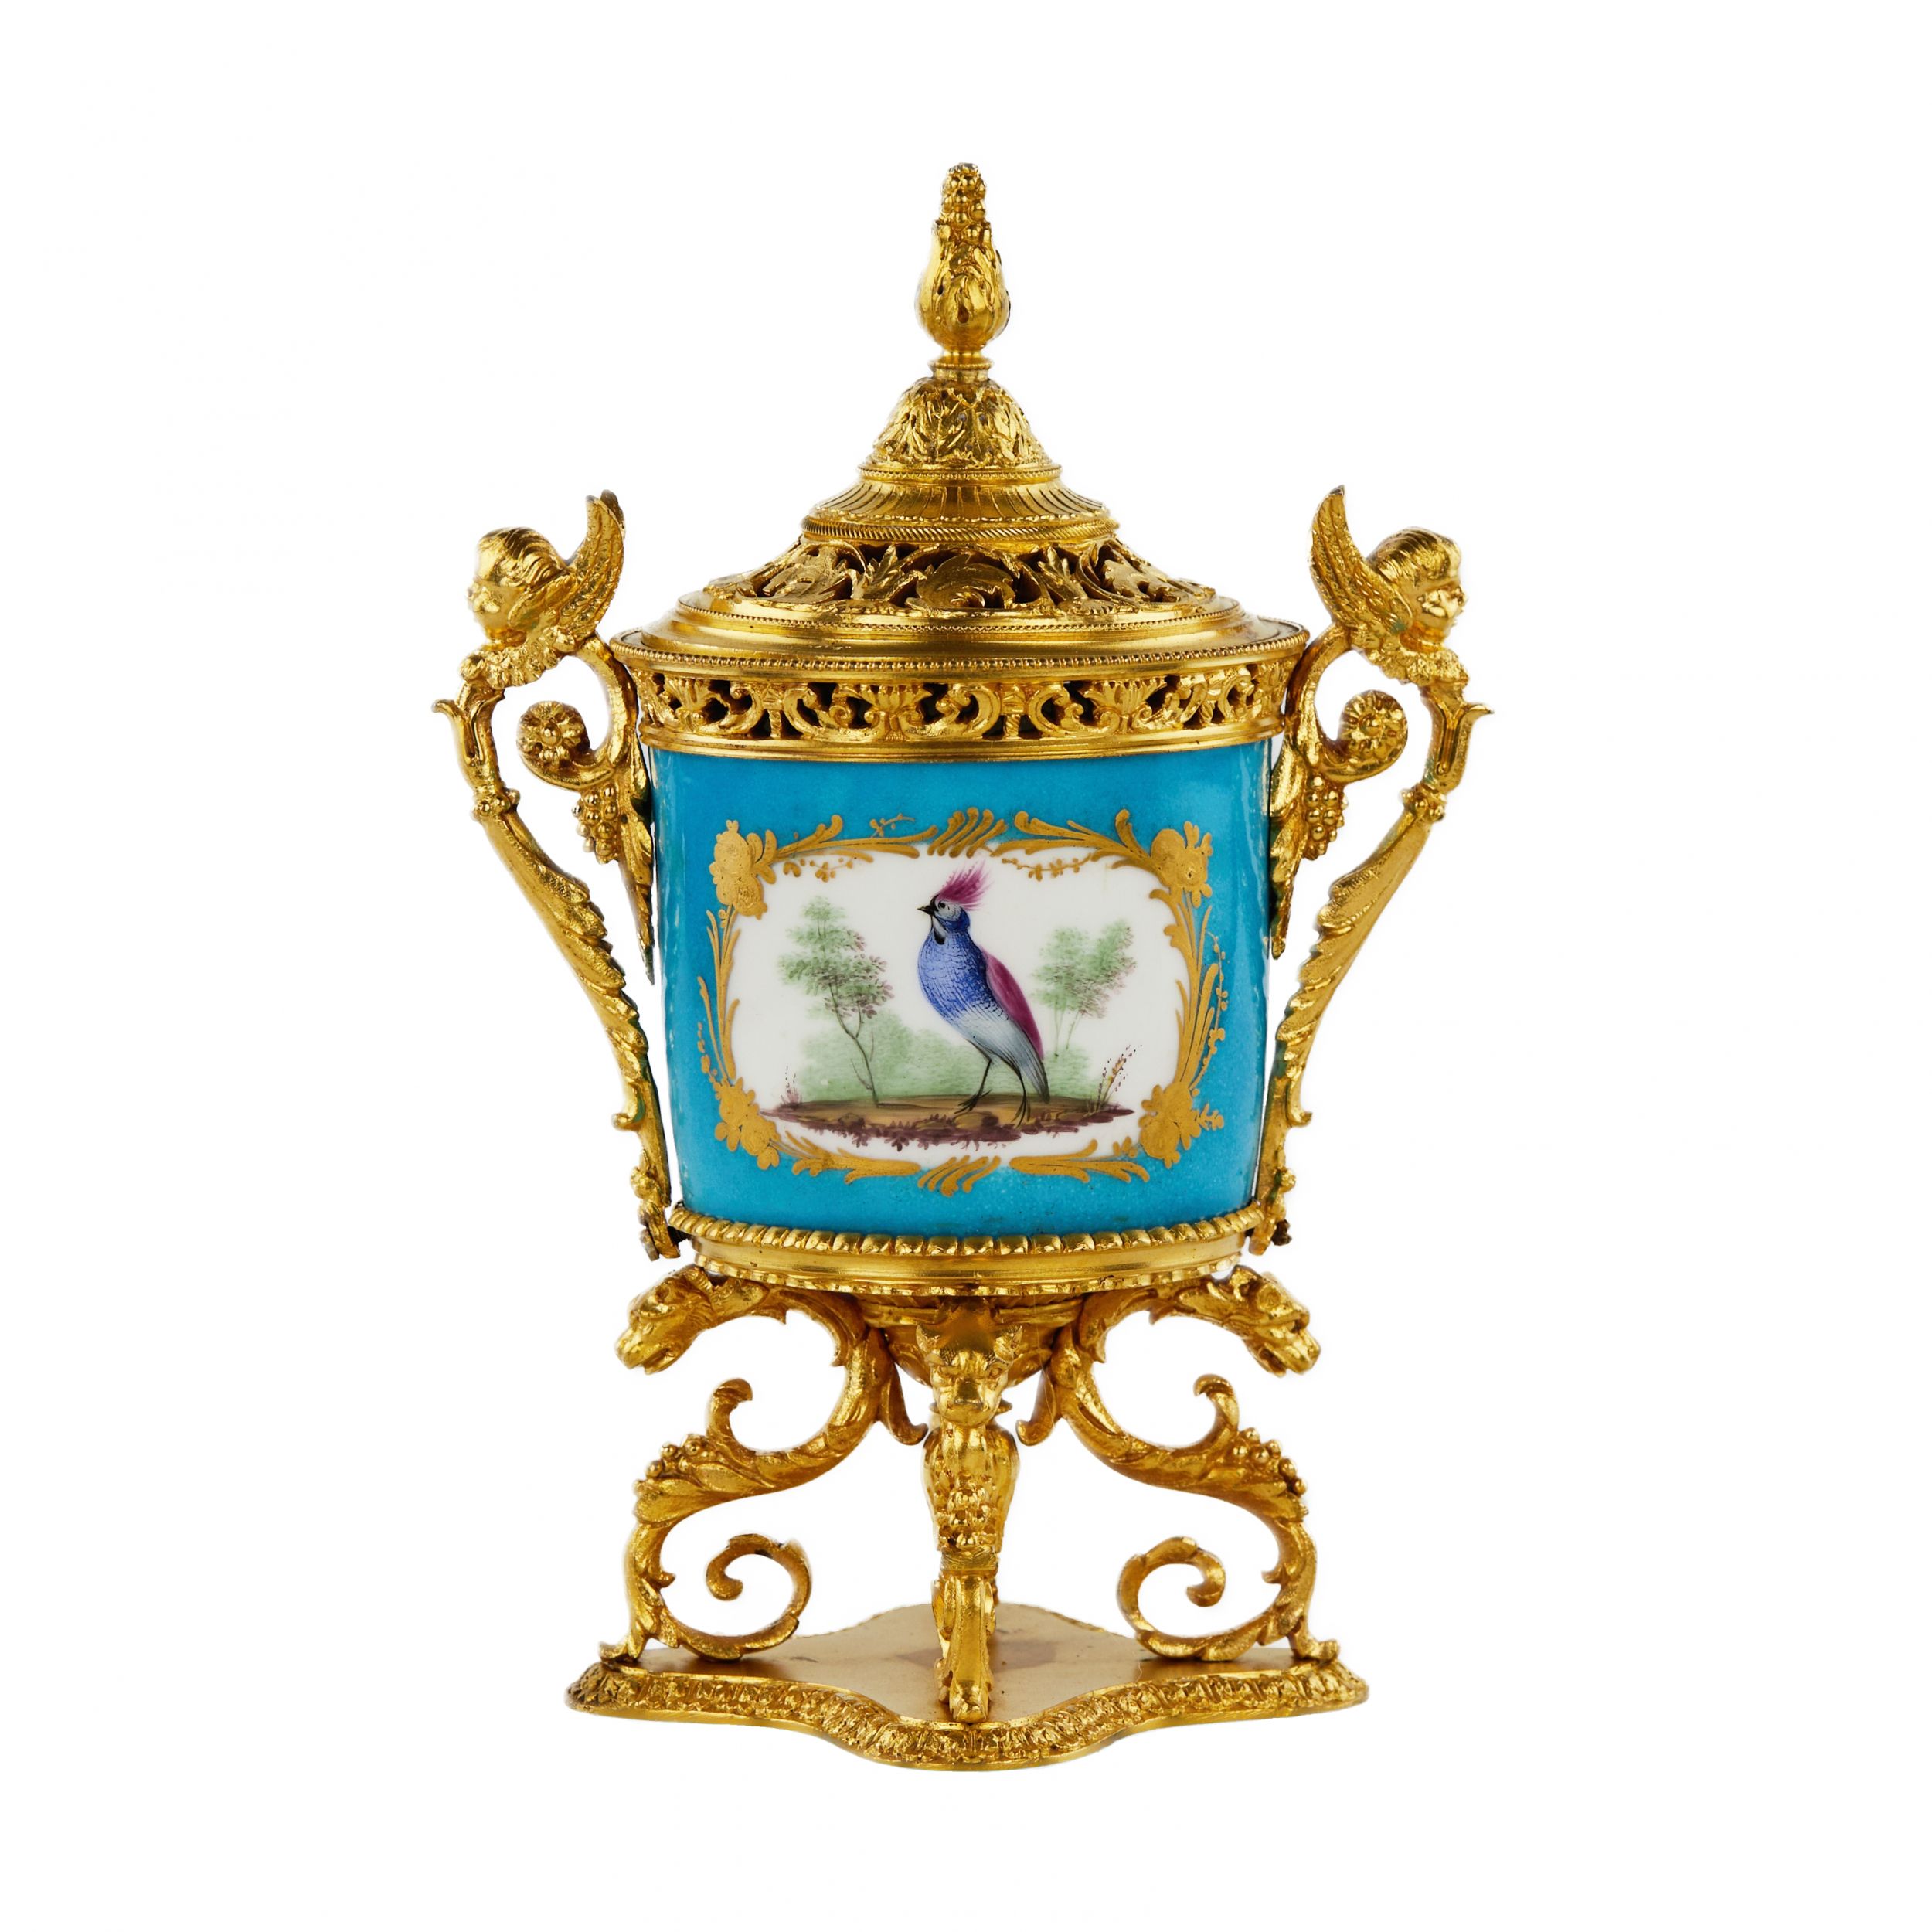 Bronze-gilded-aroma-box-with-porcelain-inlay-in-the-Sevres-style-The-end-of-the-19th-century-